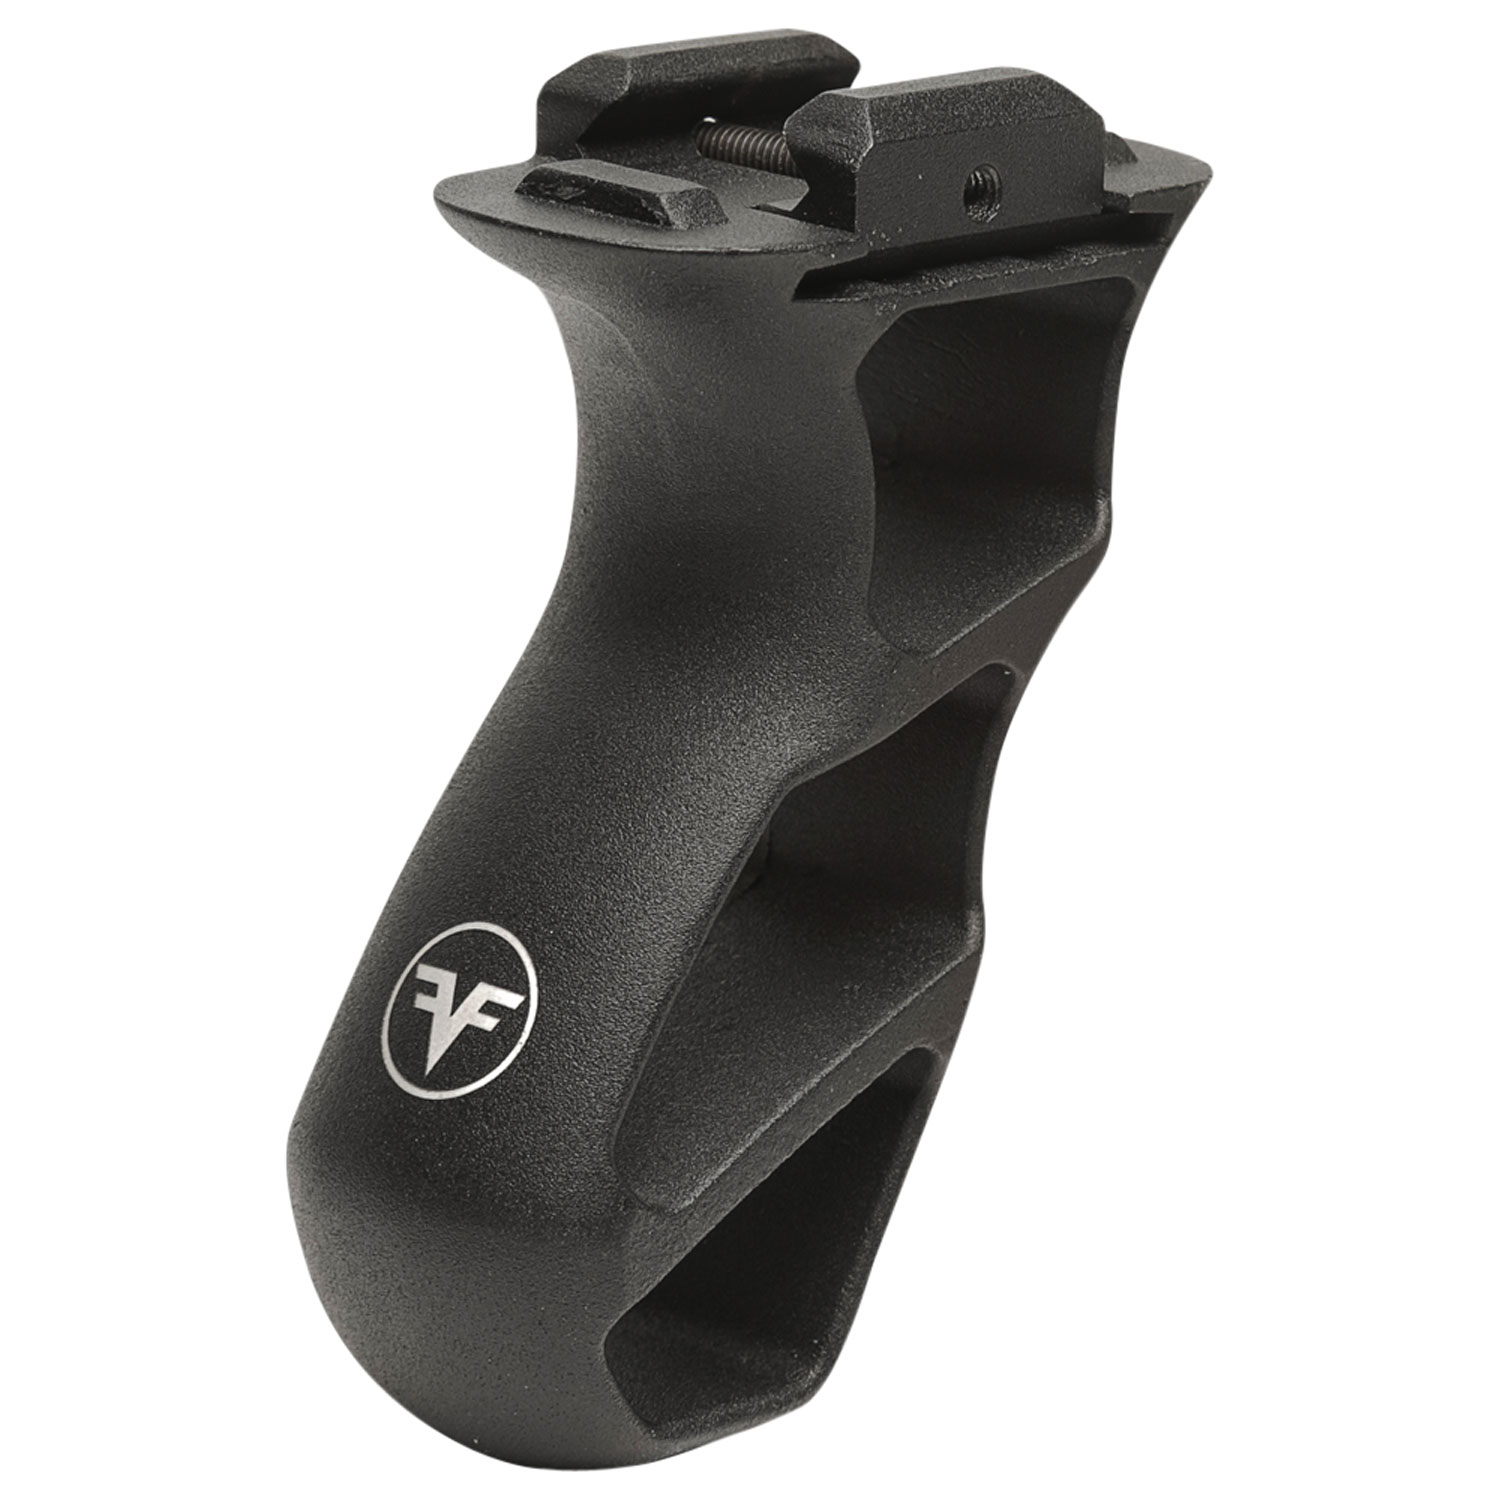 Firefield FF35004 Rival Foregrip Matte Black Aluminum Picatinny Mounted for AR-Platform